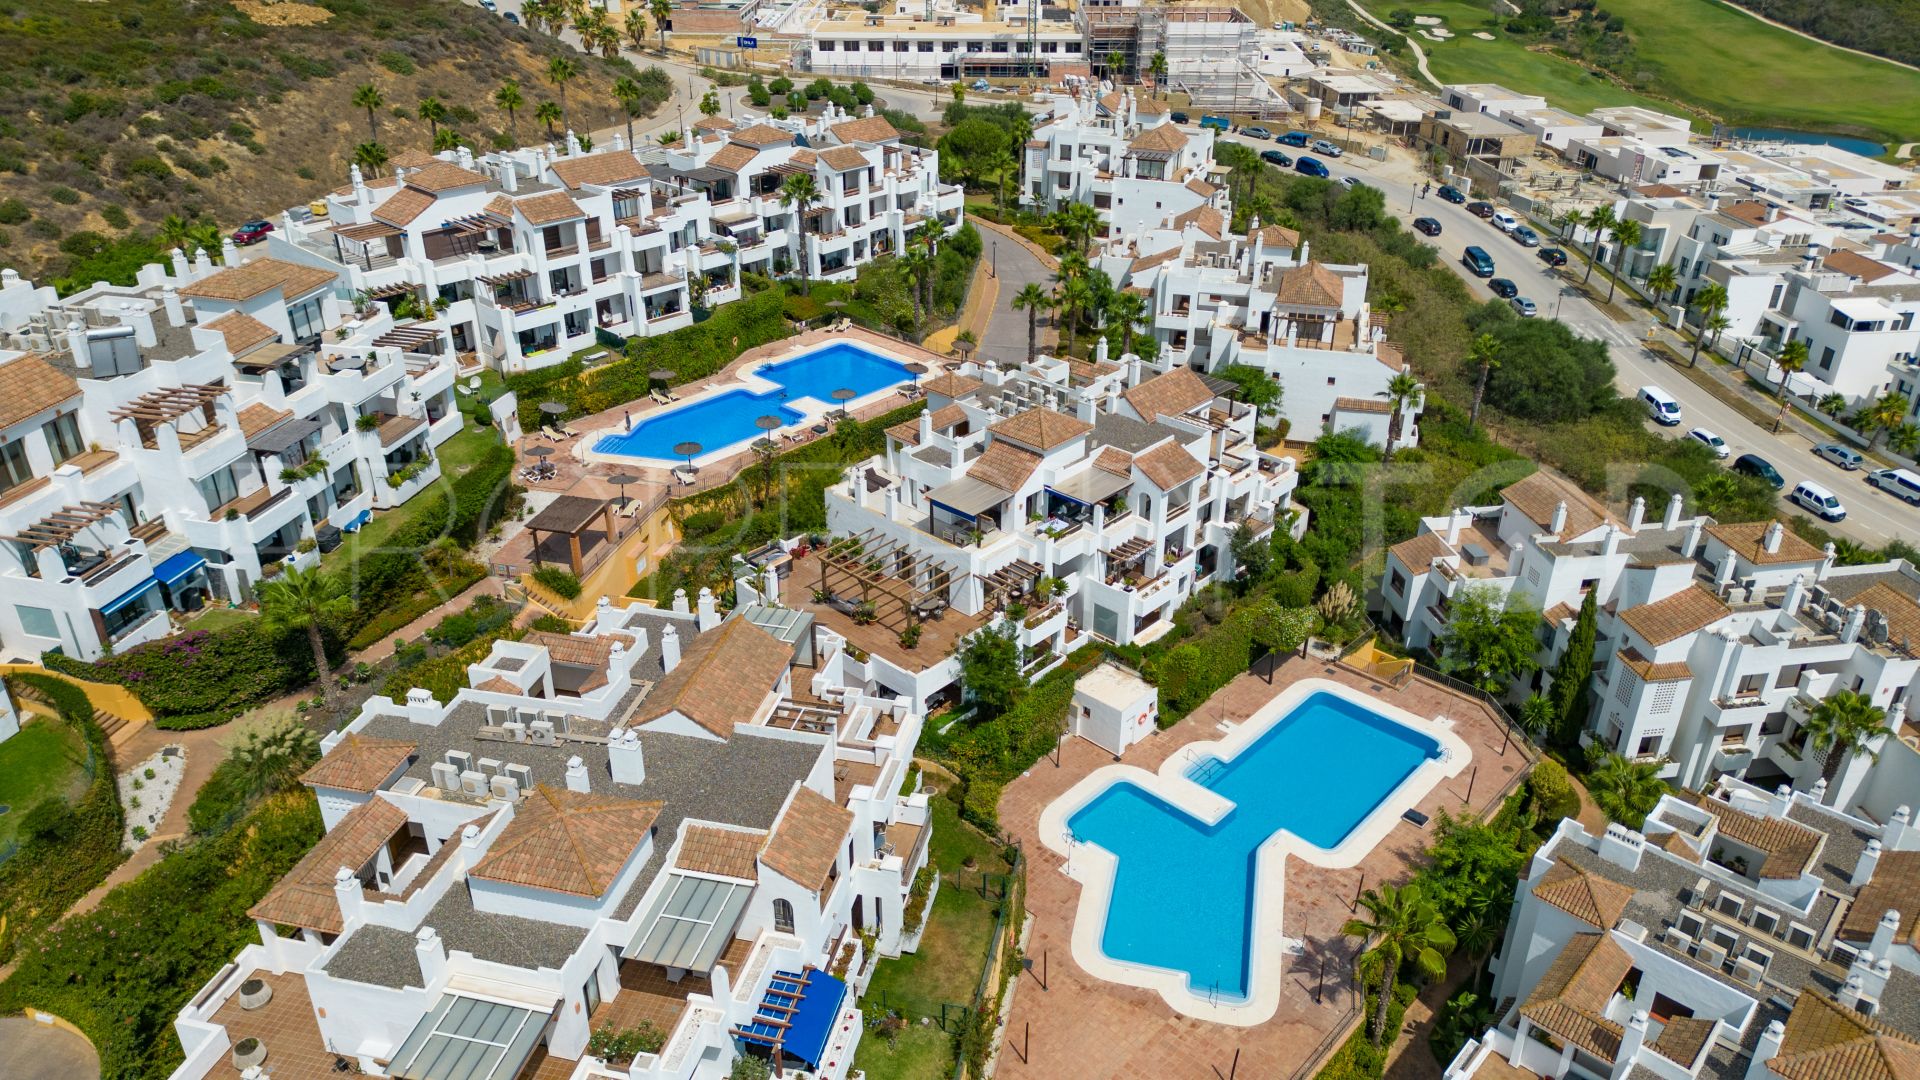 2 bedrooms penthouse in Alcaidesa Costa for sale